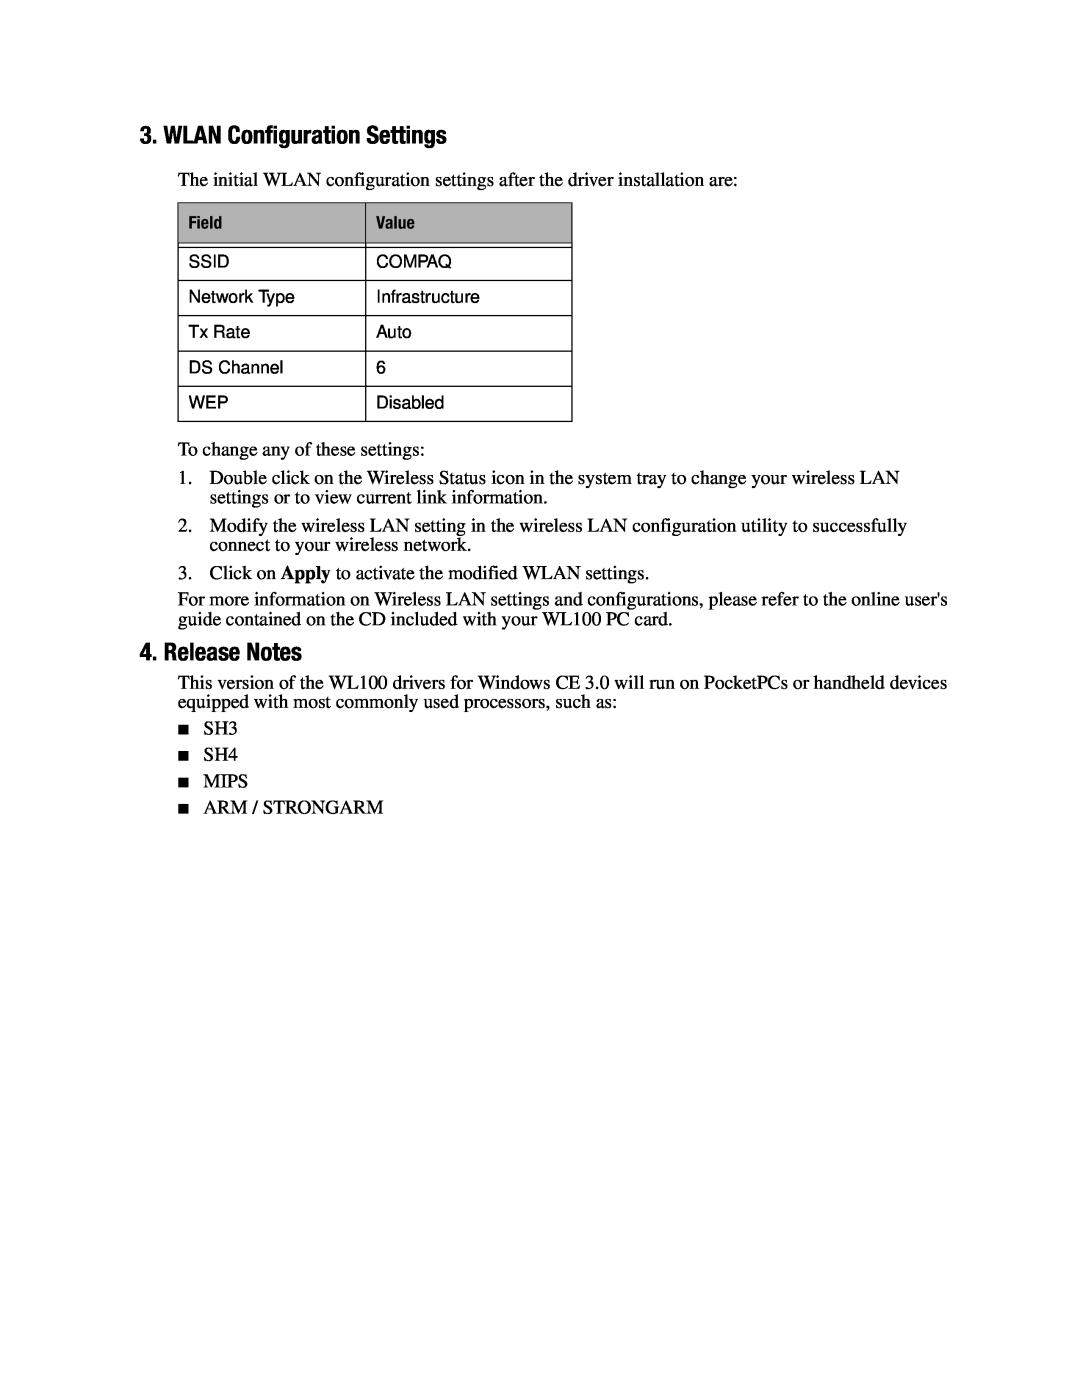 Compaq WL100 manual WLAN Configuration Settings, Release Notes 